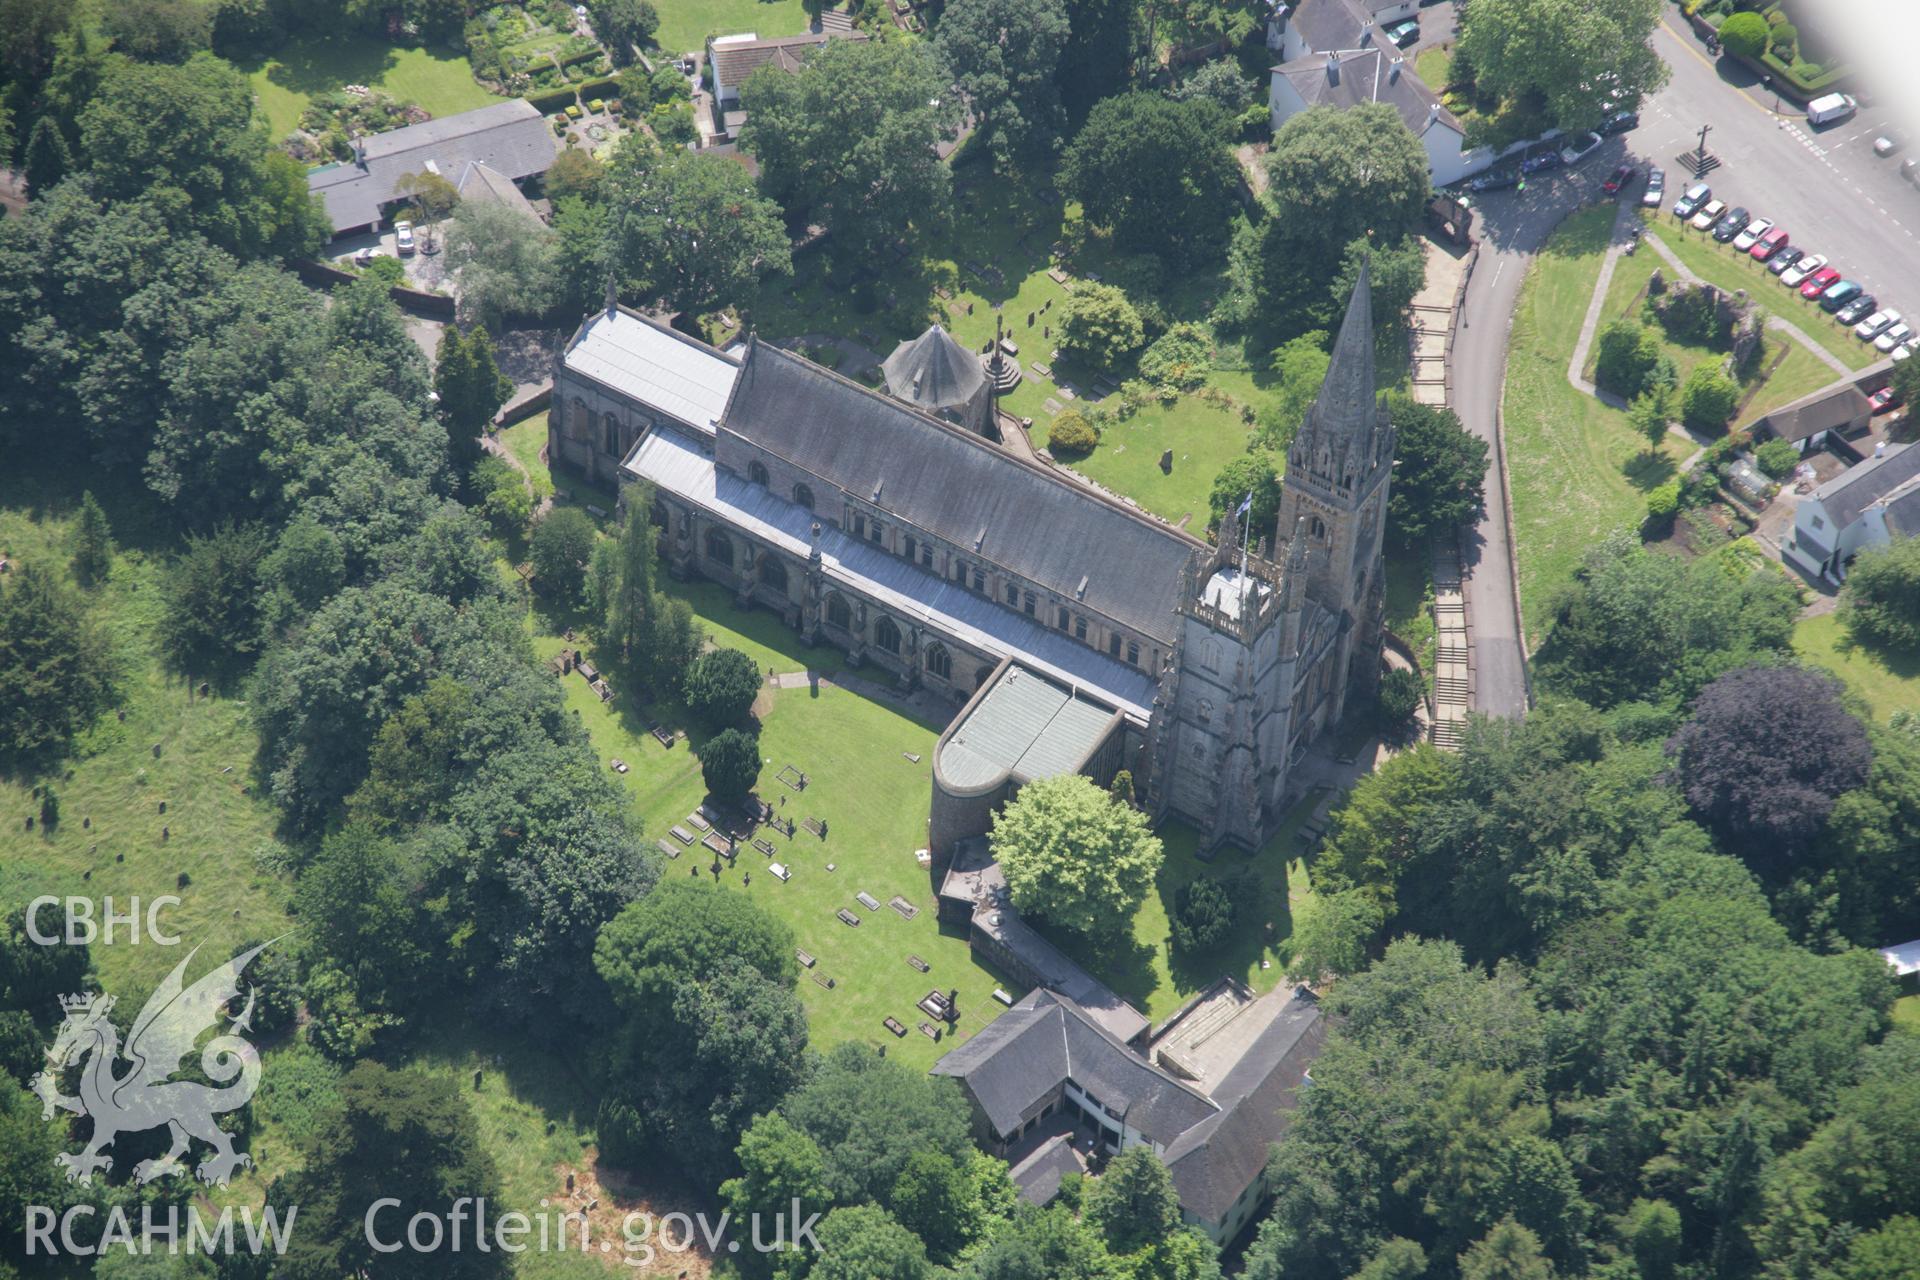 RCAHMW colour oblique photograph of Llandaff Cathedral. Taken by Toby Driver on 29/06/2006.